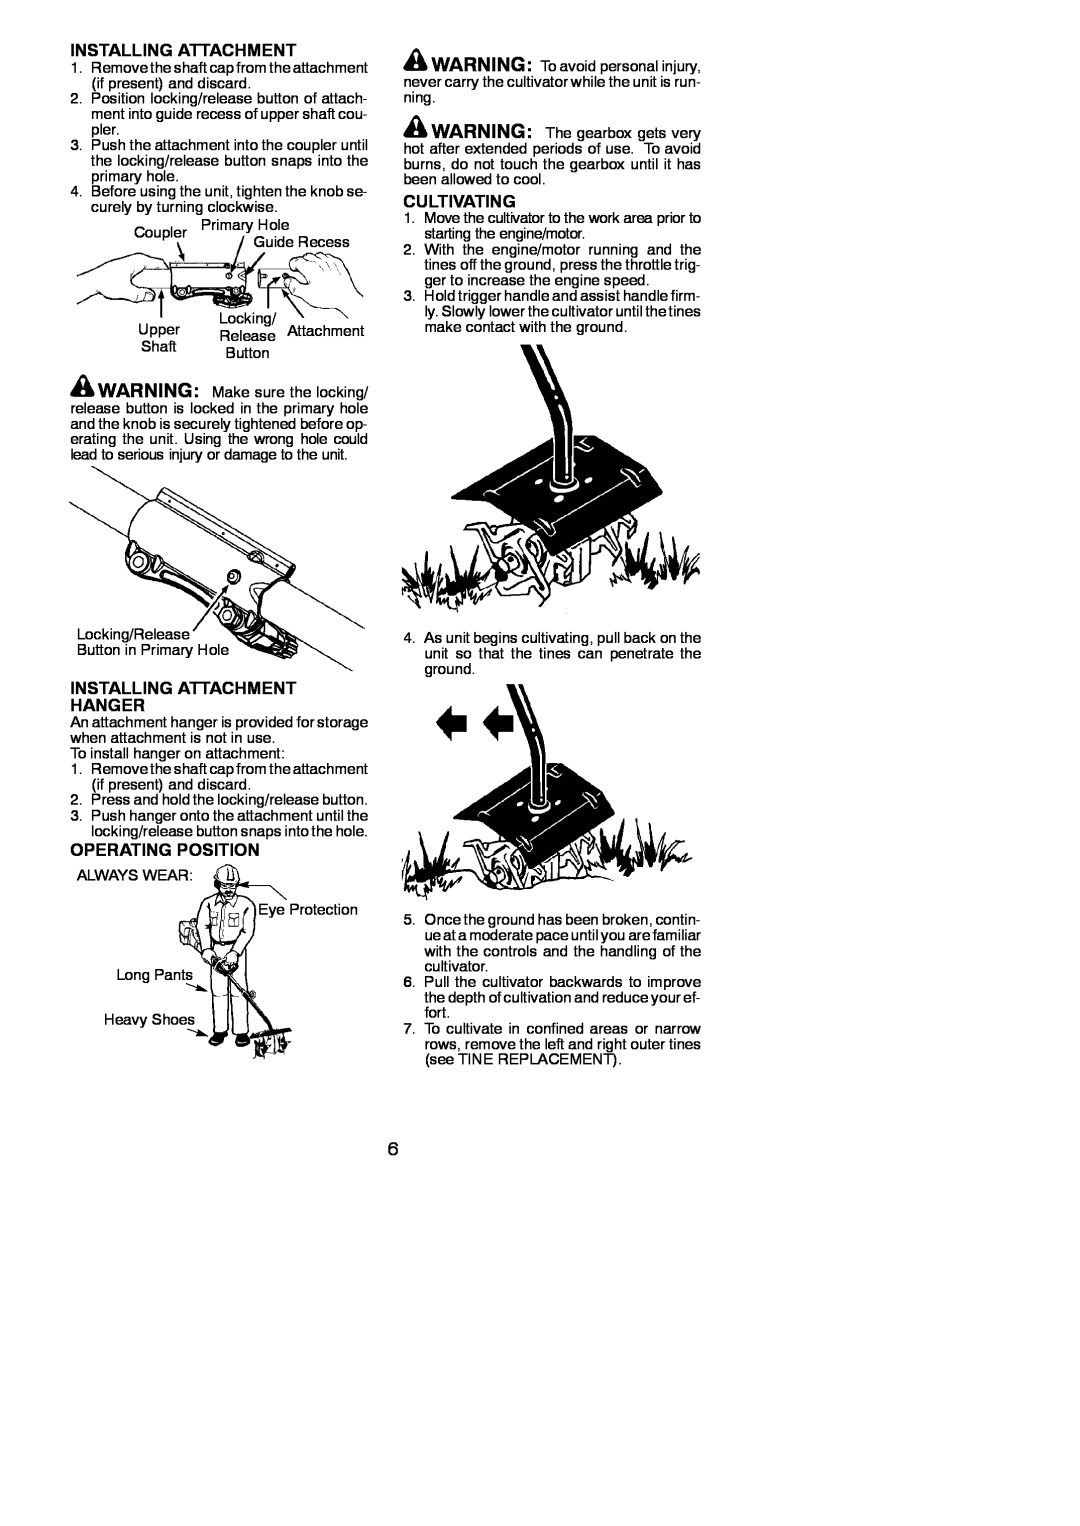 Poulan 952711608, 545212825 instruction manual Installing Attachment Hanger, Operating Position, Cultivating 